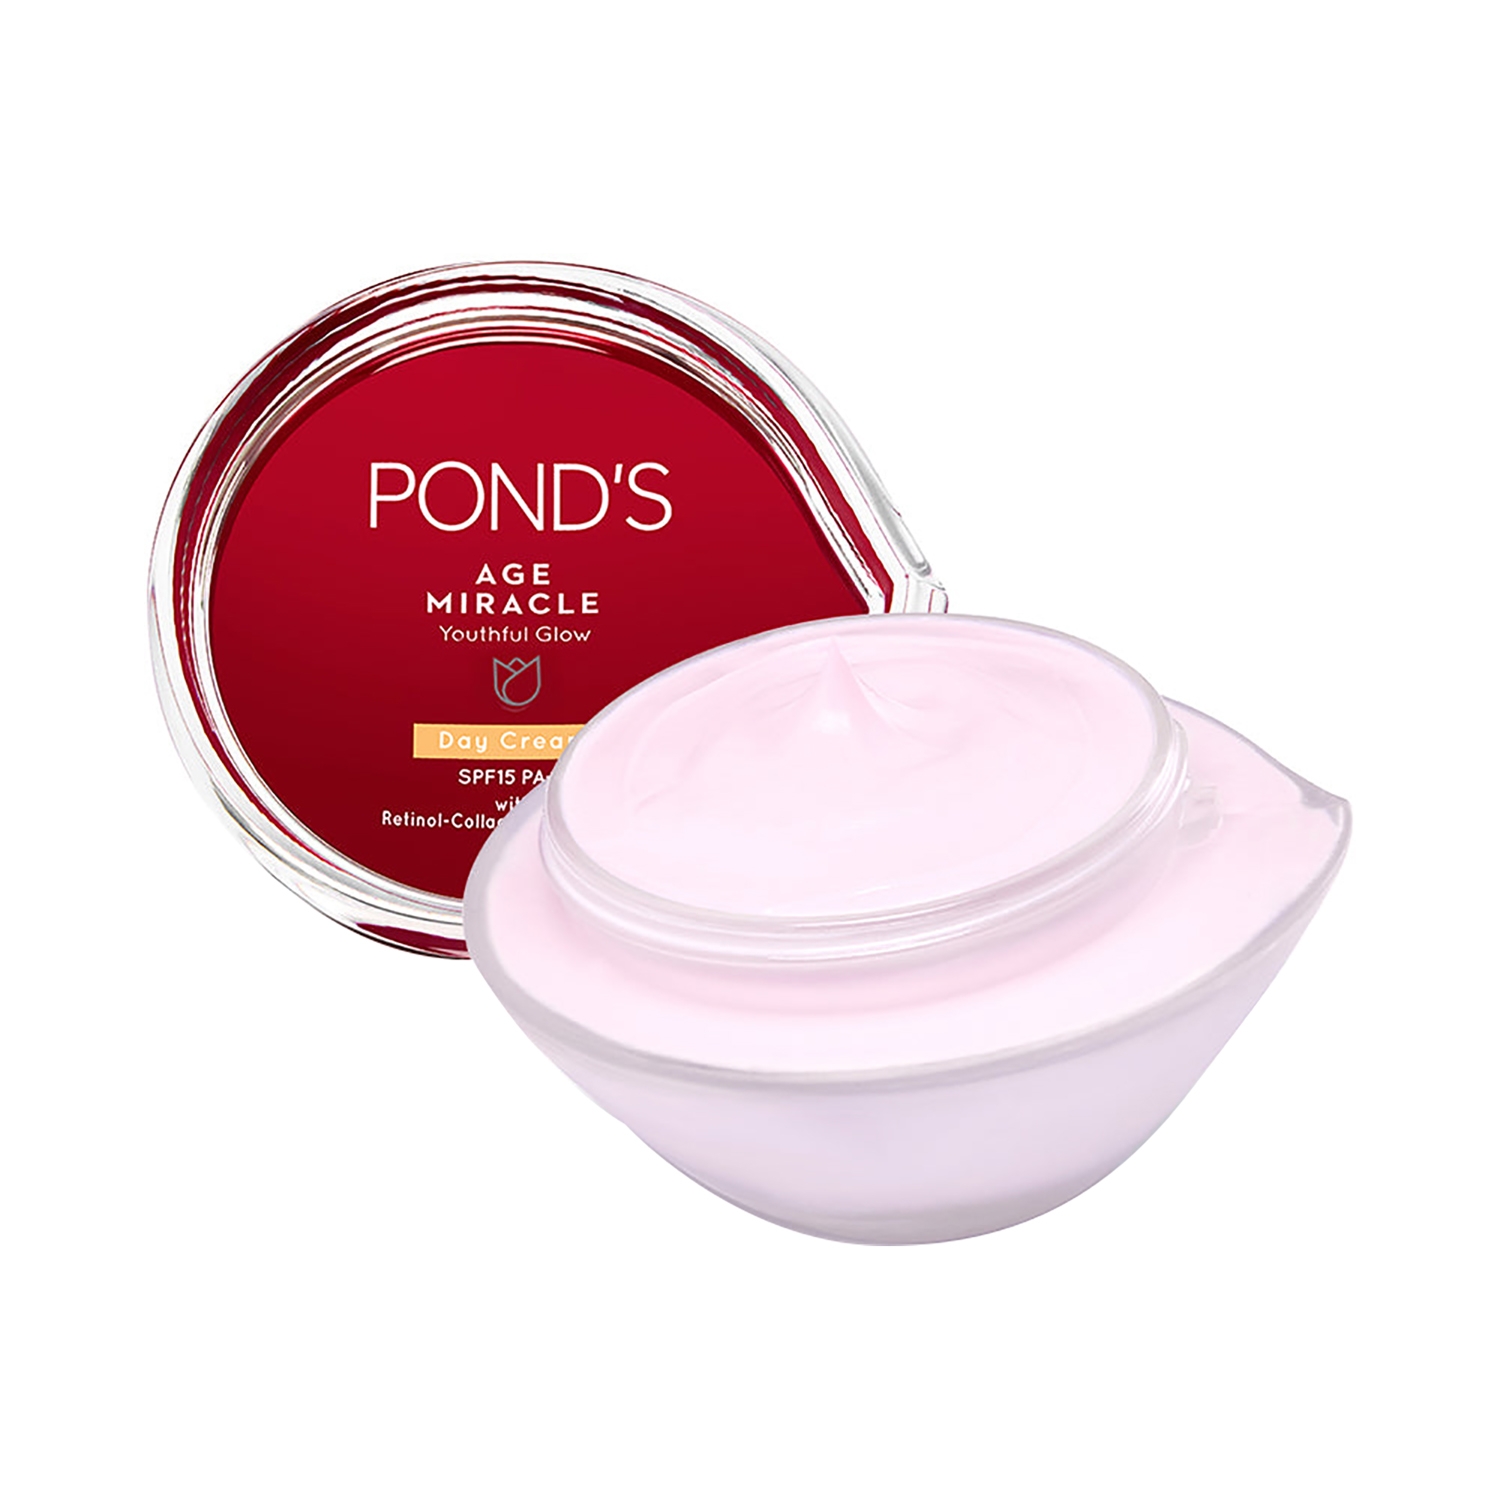 Pond's | Pond's Age Miracle Youthful Glow Day Cream SPF 15 PA++ (35g)